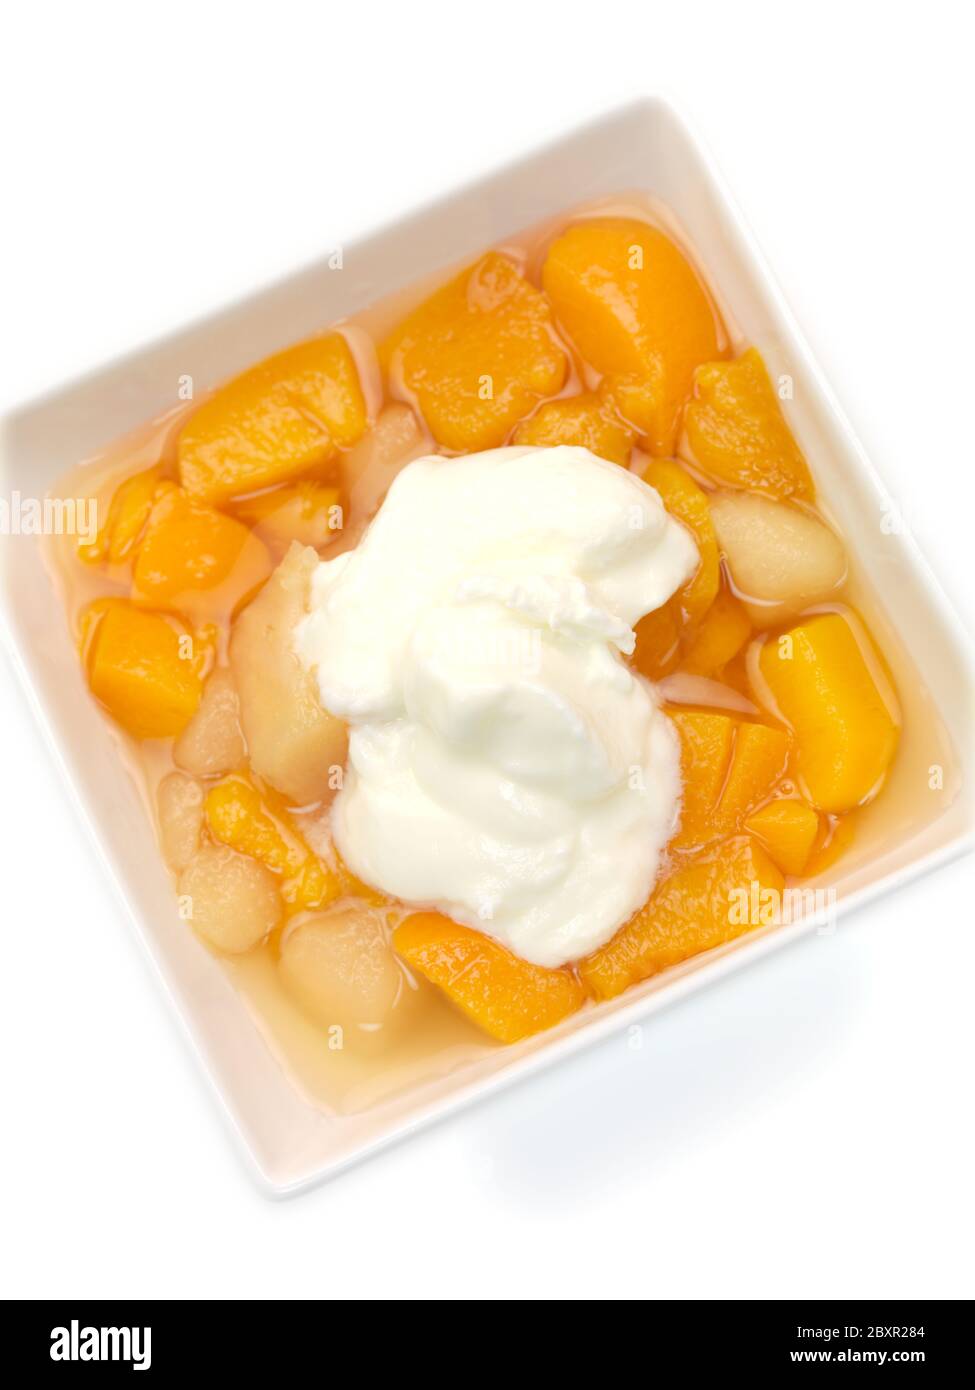 Diced pears and peaches in a fruit syrup Stock Photo